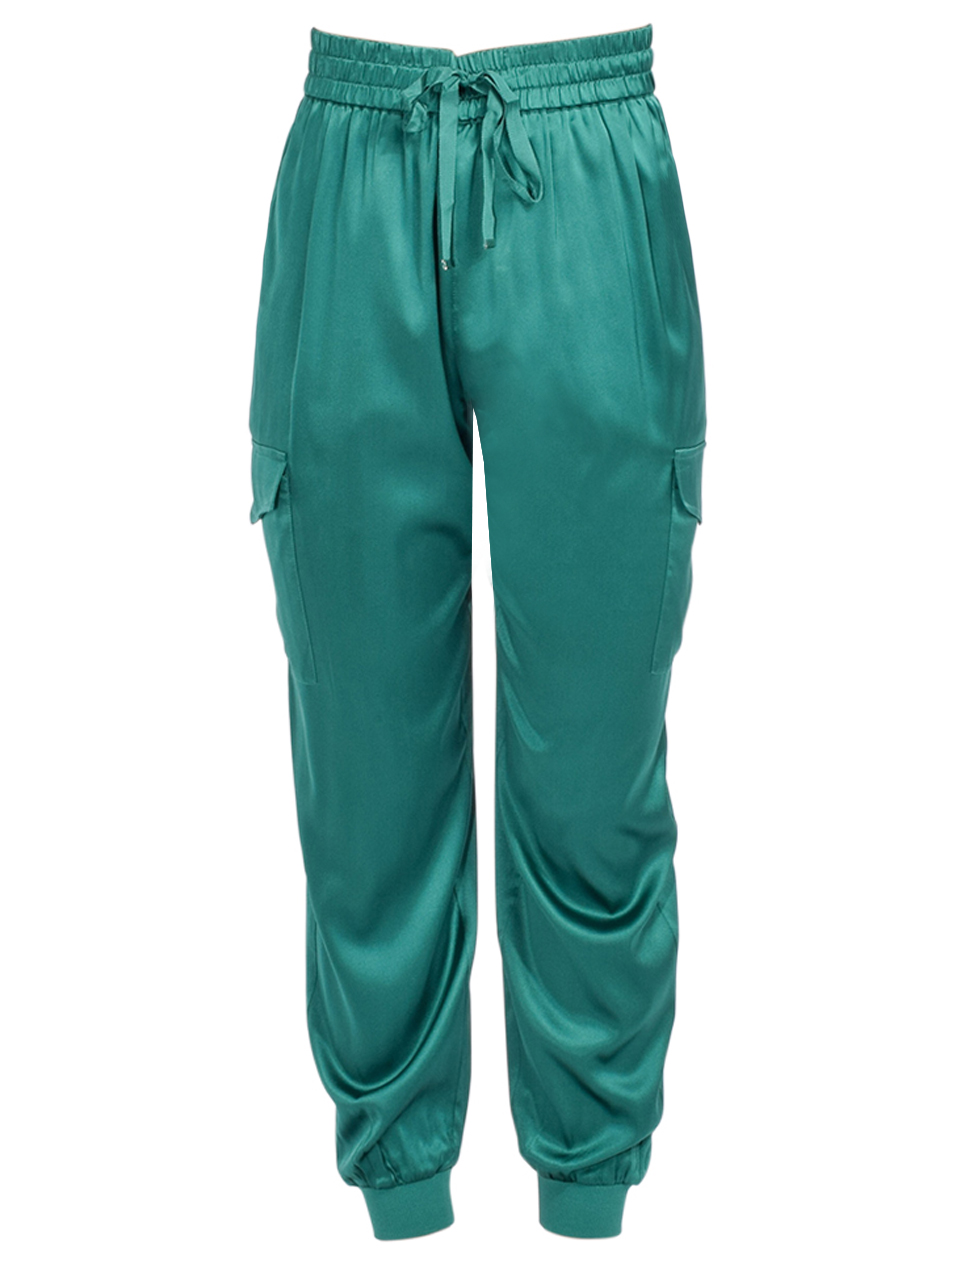 CAMI NYC Elsie Pant in Spruce Product Shot 